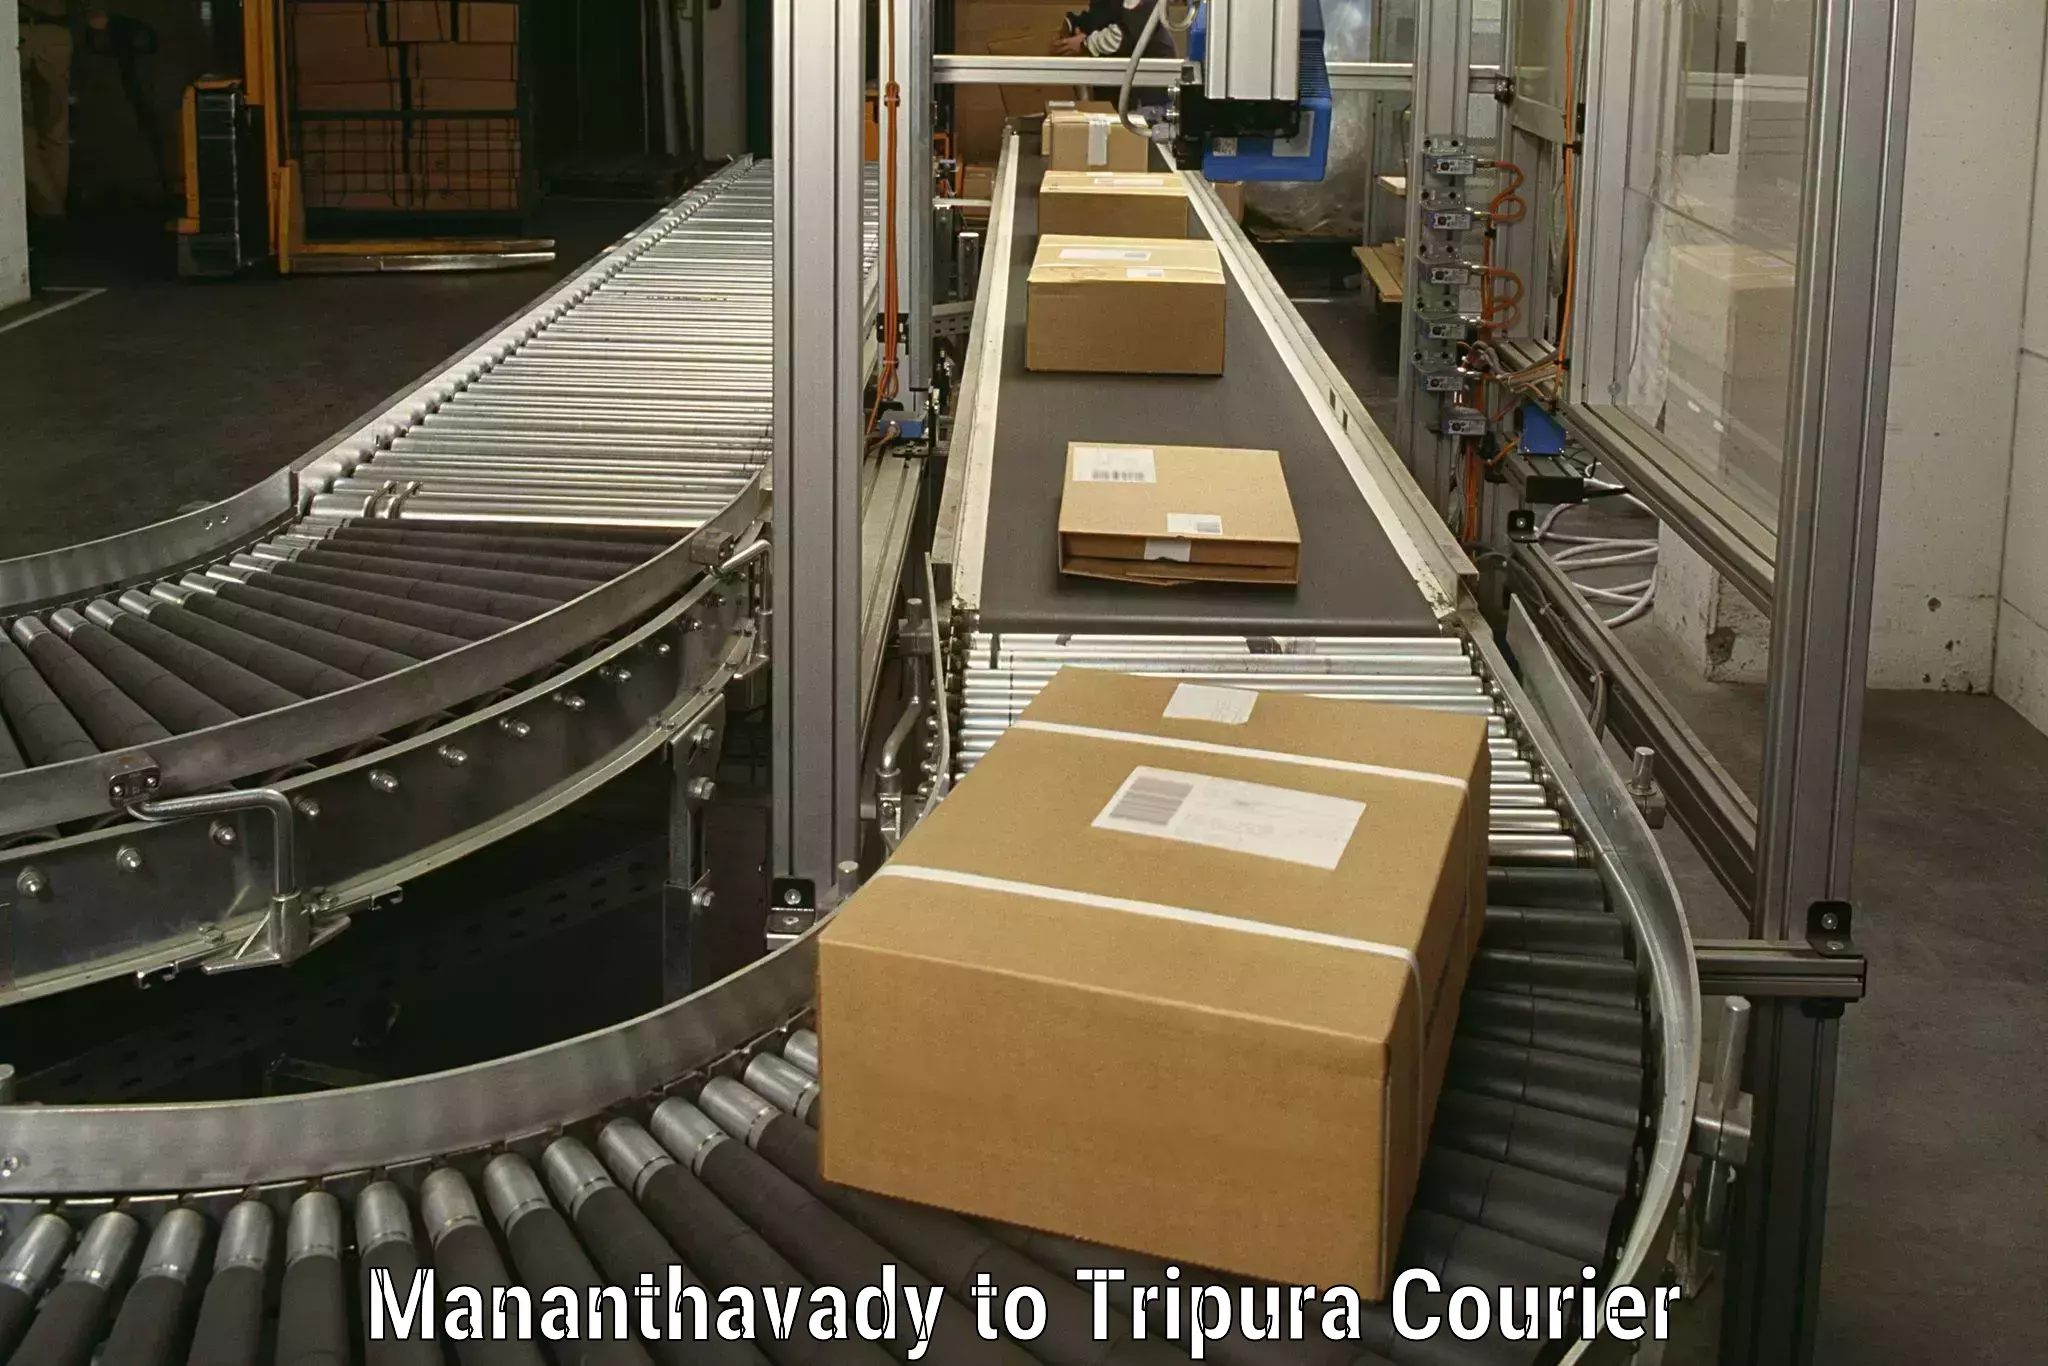 Furniture transport specialists Mananthavady to Tripura